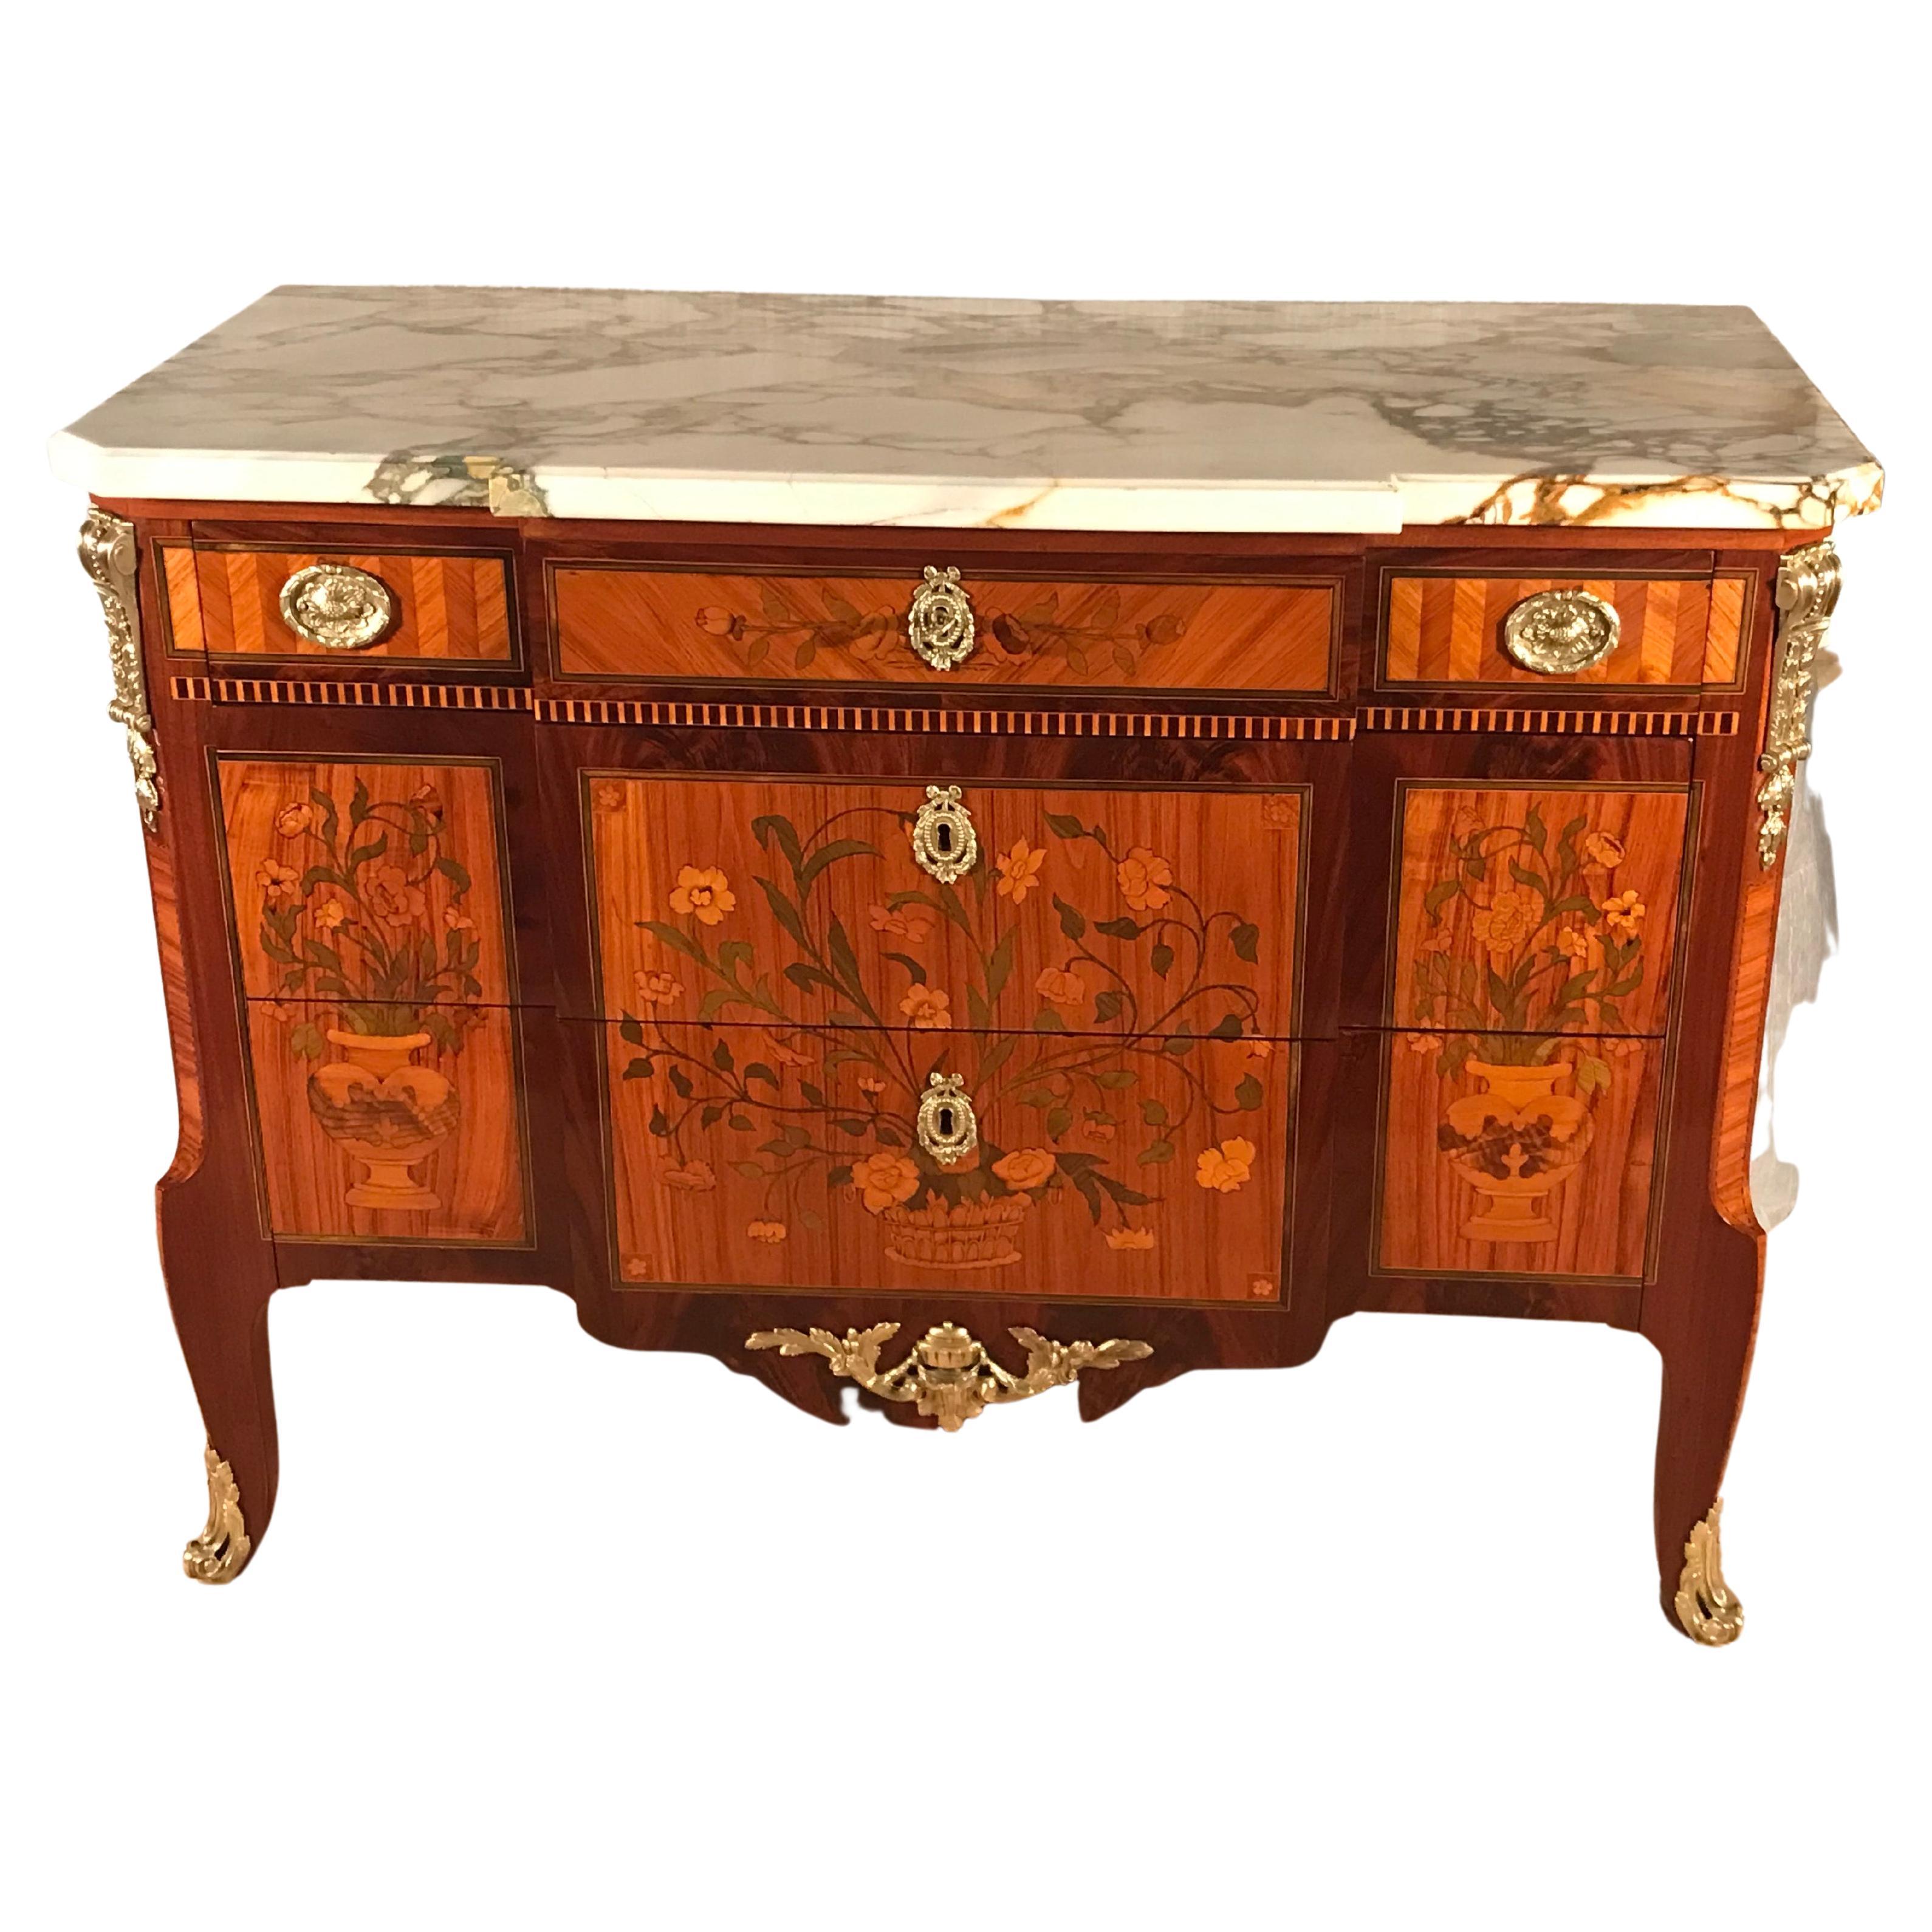 This gorgeous Louis XV Transition Style chest of drawers was made in the mid 19th Century.
The chest has an extraordinary flower marquetry. The three drawer commode's front is structured in different marquetry fields. The upper drawer has a middle